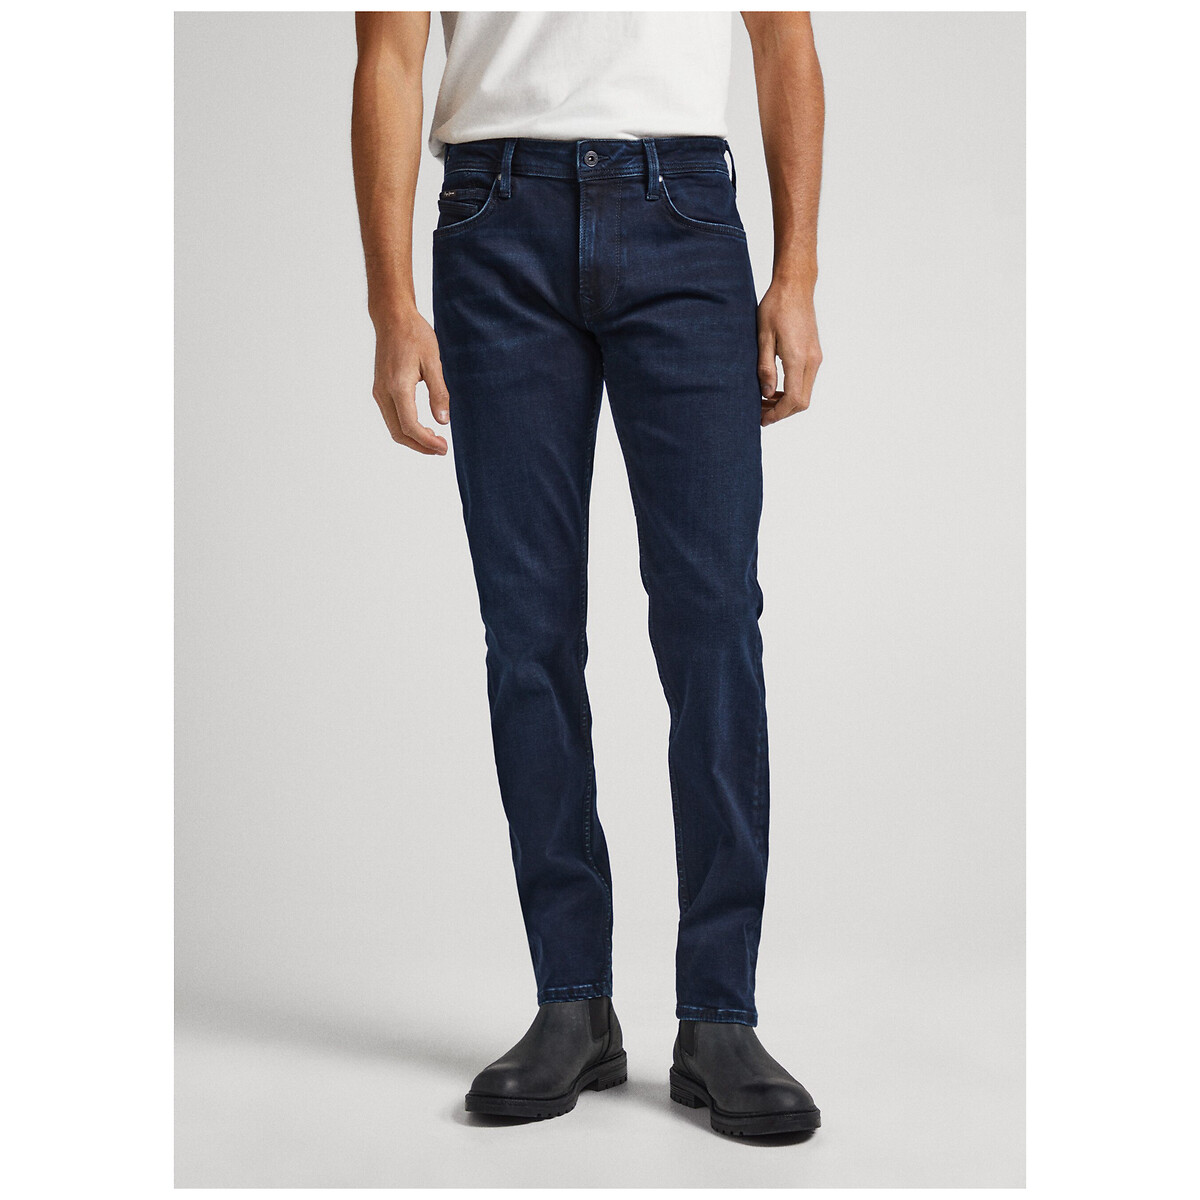 Image of Hatch Regular Jeans in Slim Fit and Mid Rise